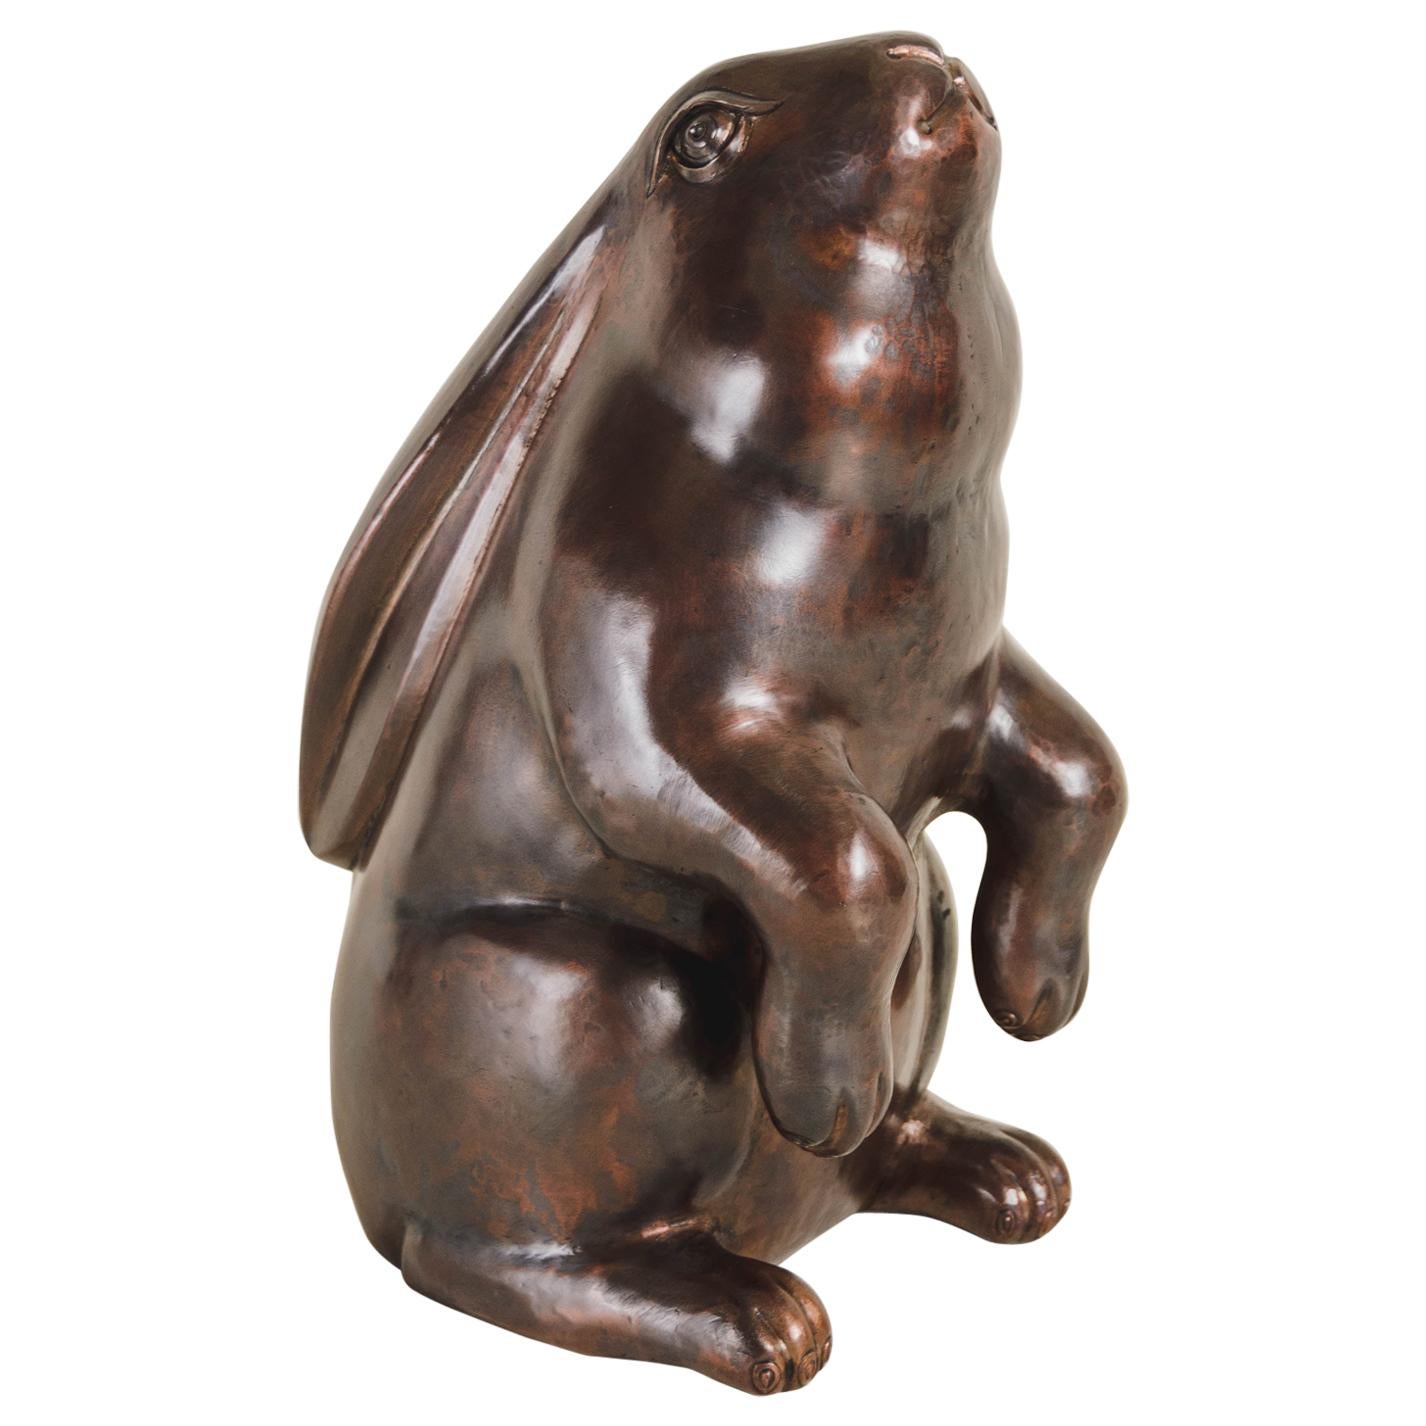 Contemporary Sitting Rabbit Sculpture in Antique Copper by Robert Kuo For Sale